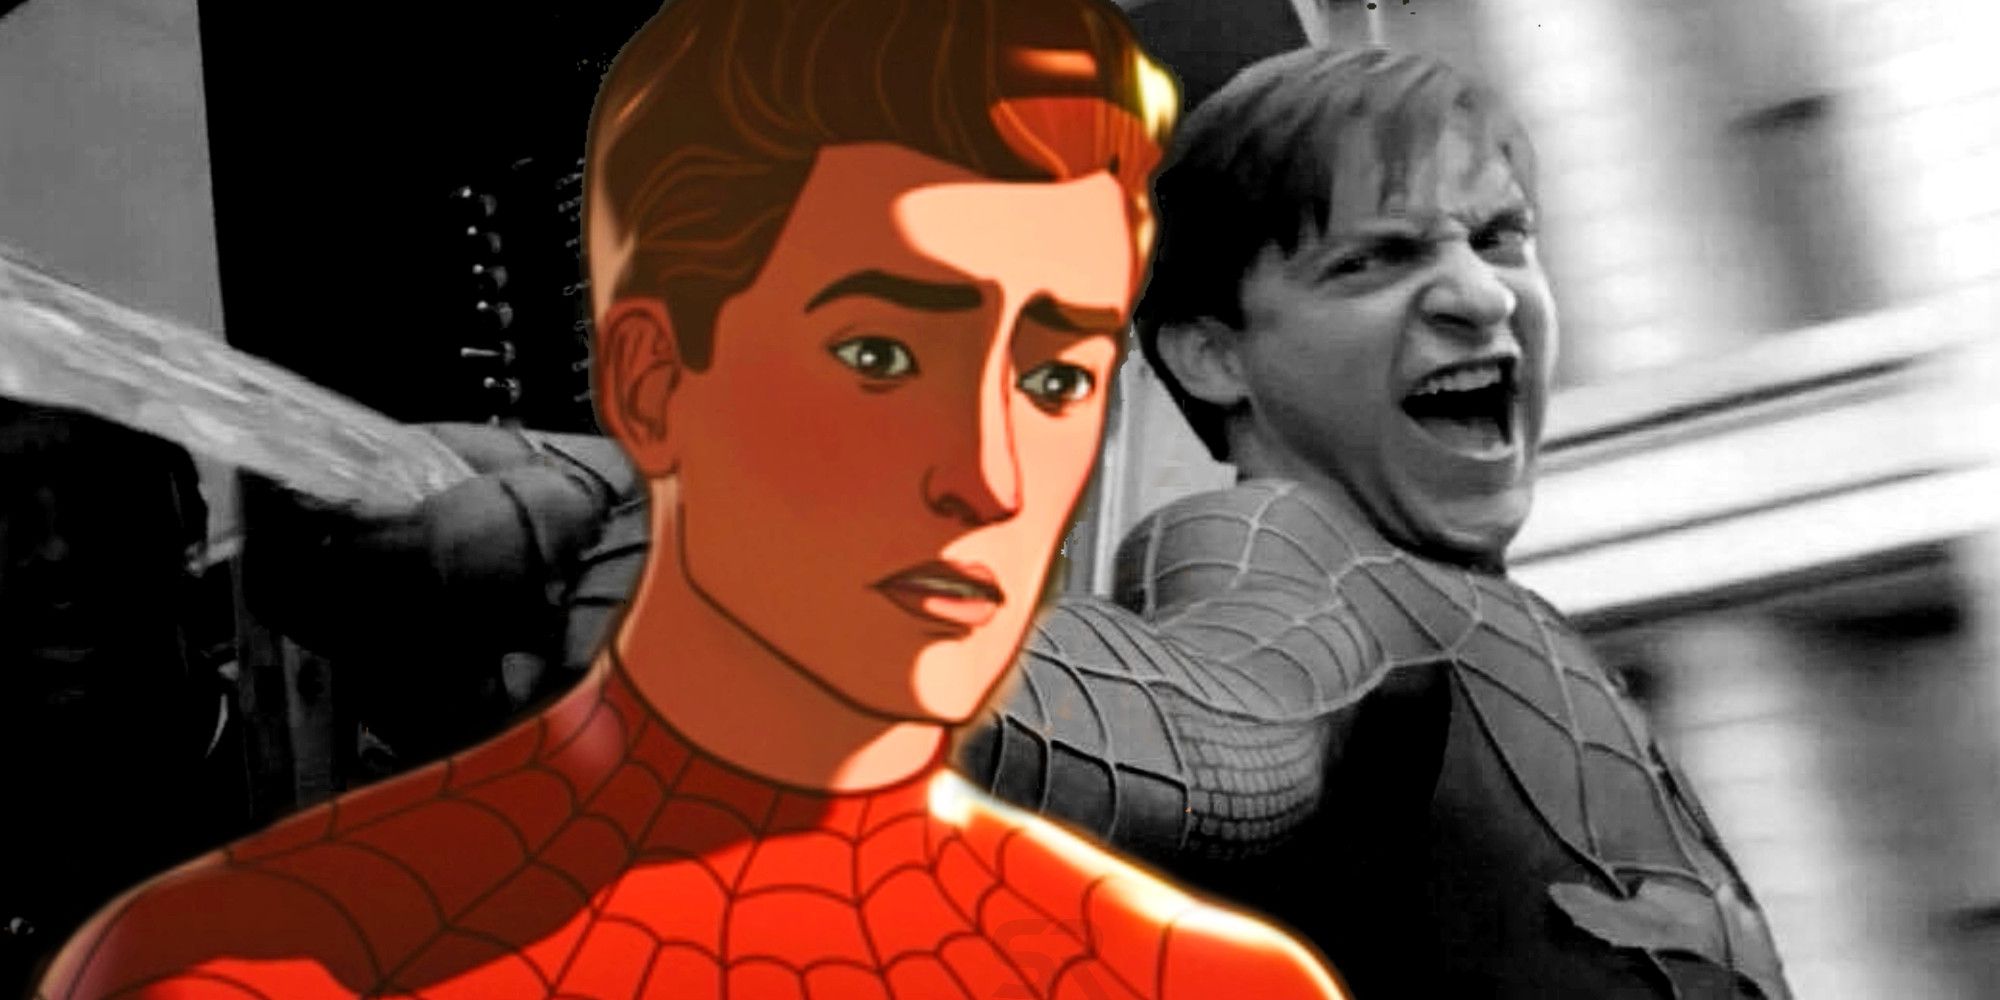 Tobey Maguire in Spider-Man 2 and Hudson Thames as Peter Parker in Marvel's What If Episode 5